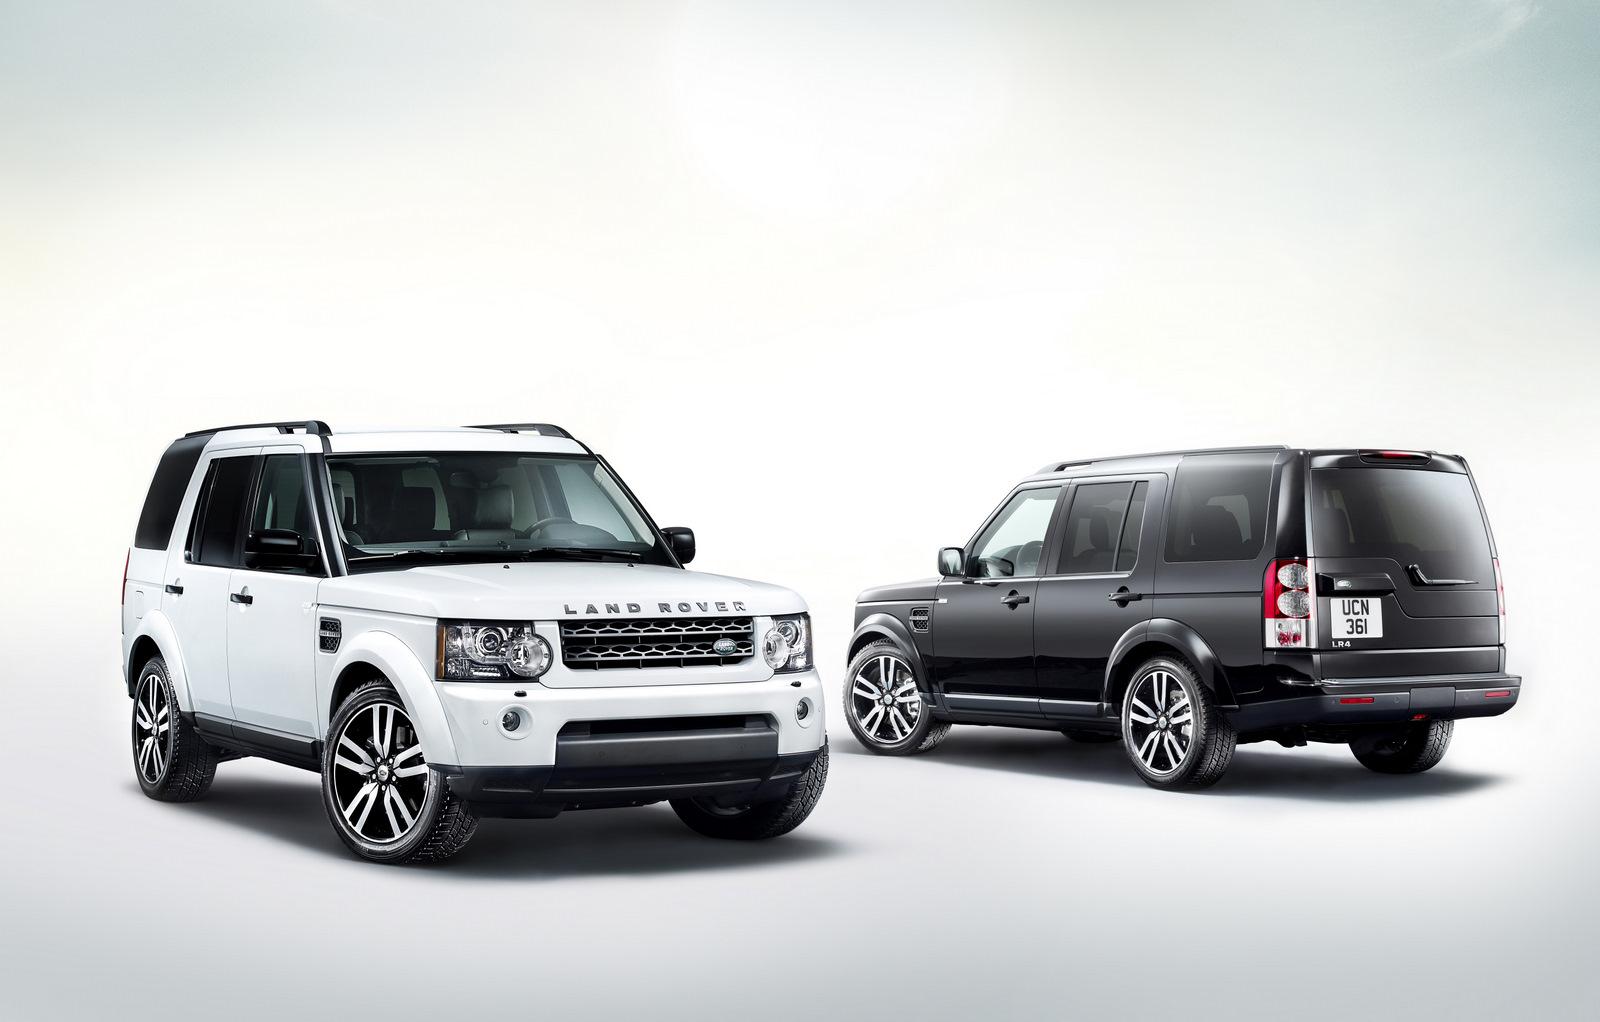 Land Rover Discovery 4 Landmark Special Edition